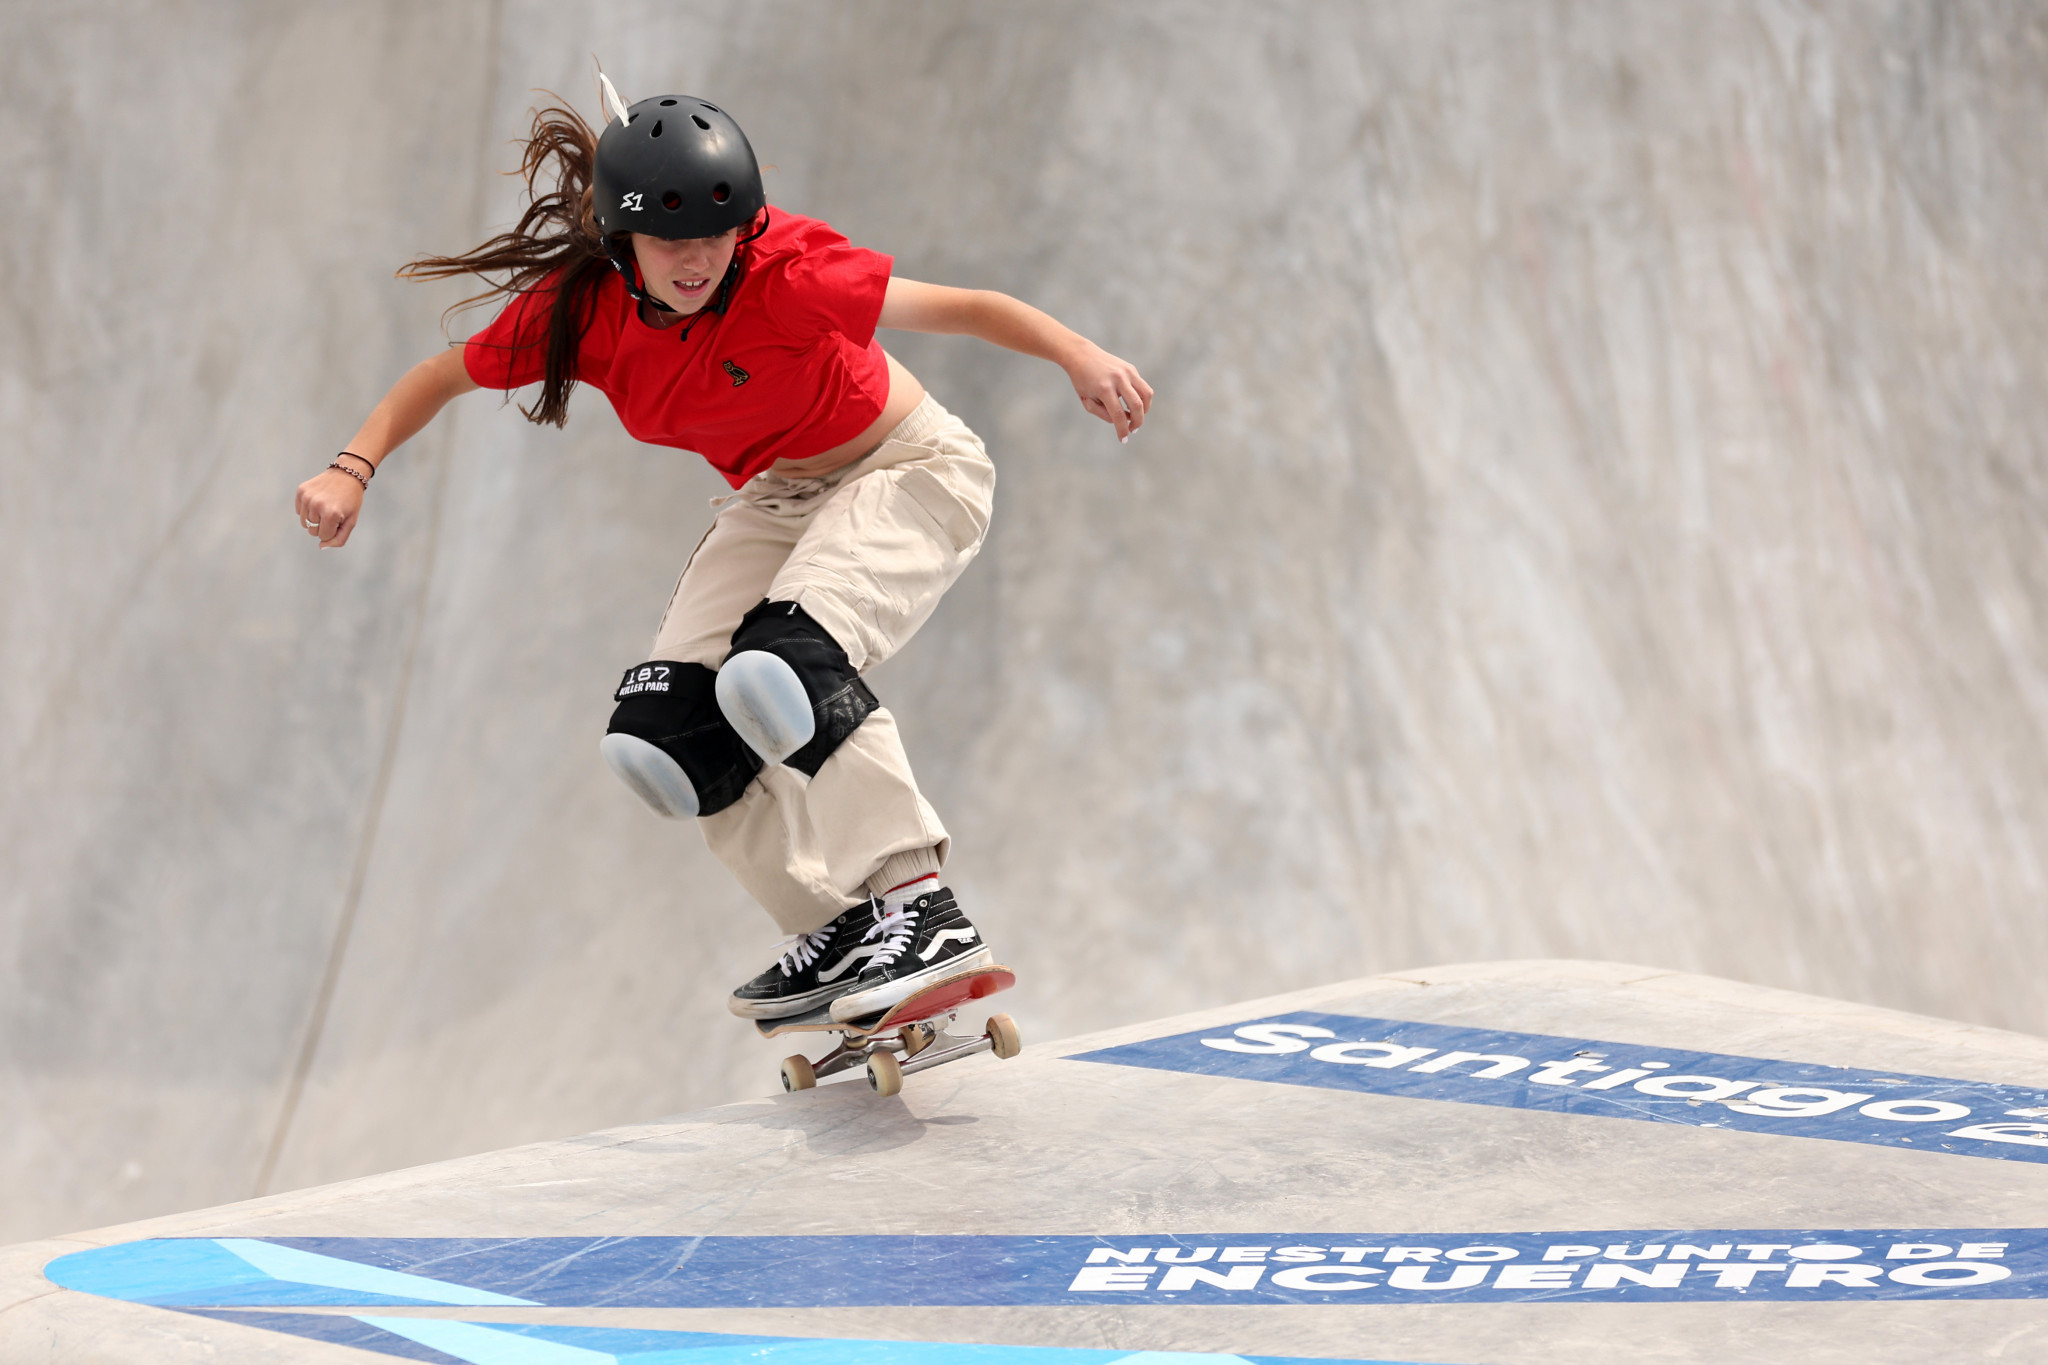 Canada's 13-year-old Fay Ebert won women's skateboarding park gold ©Getty Images